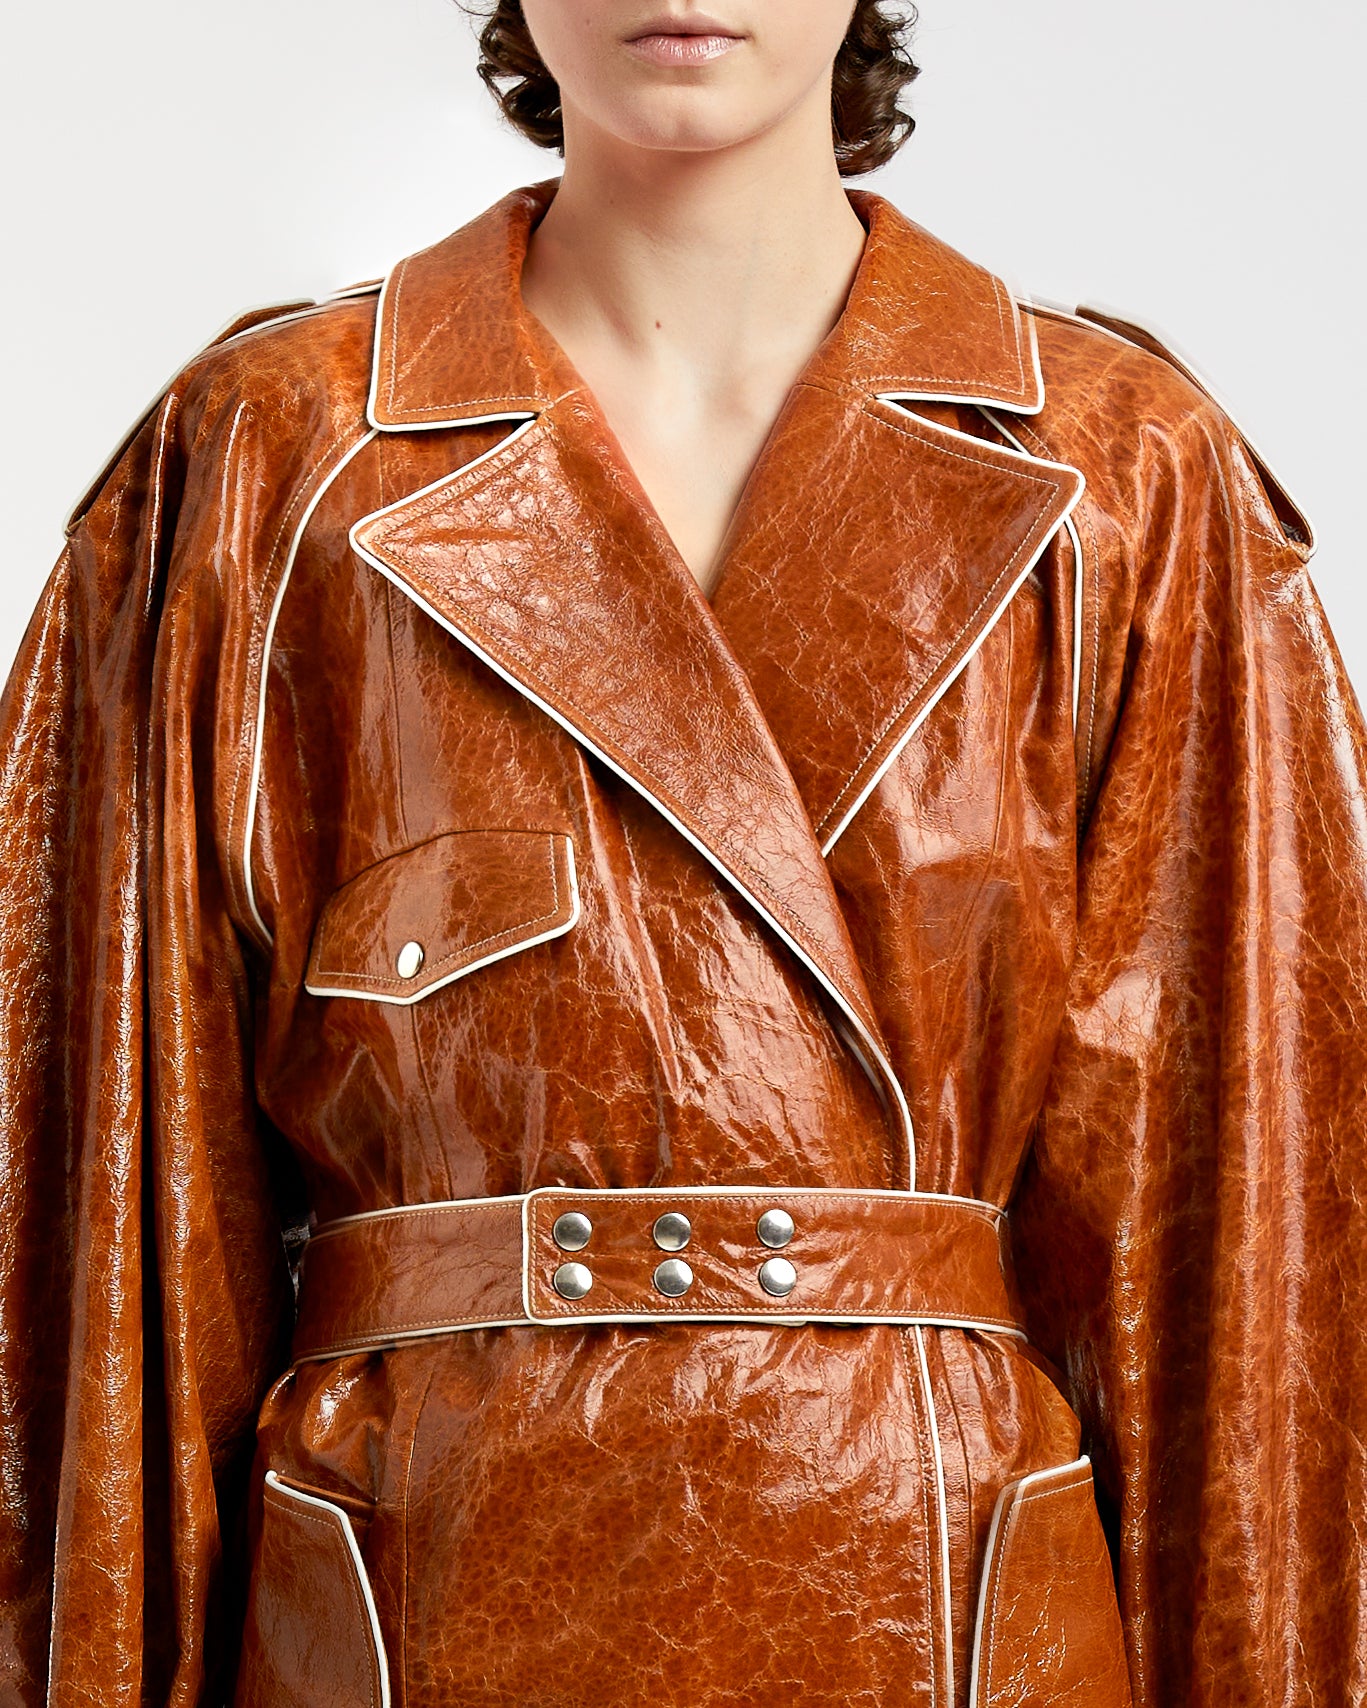 Crackle Leather Trench